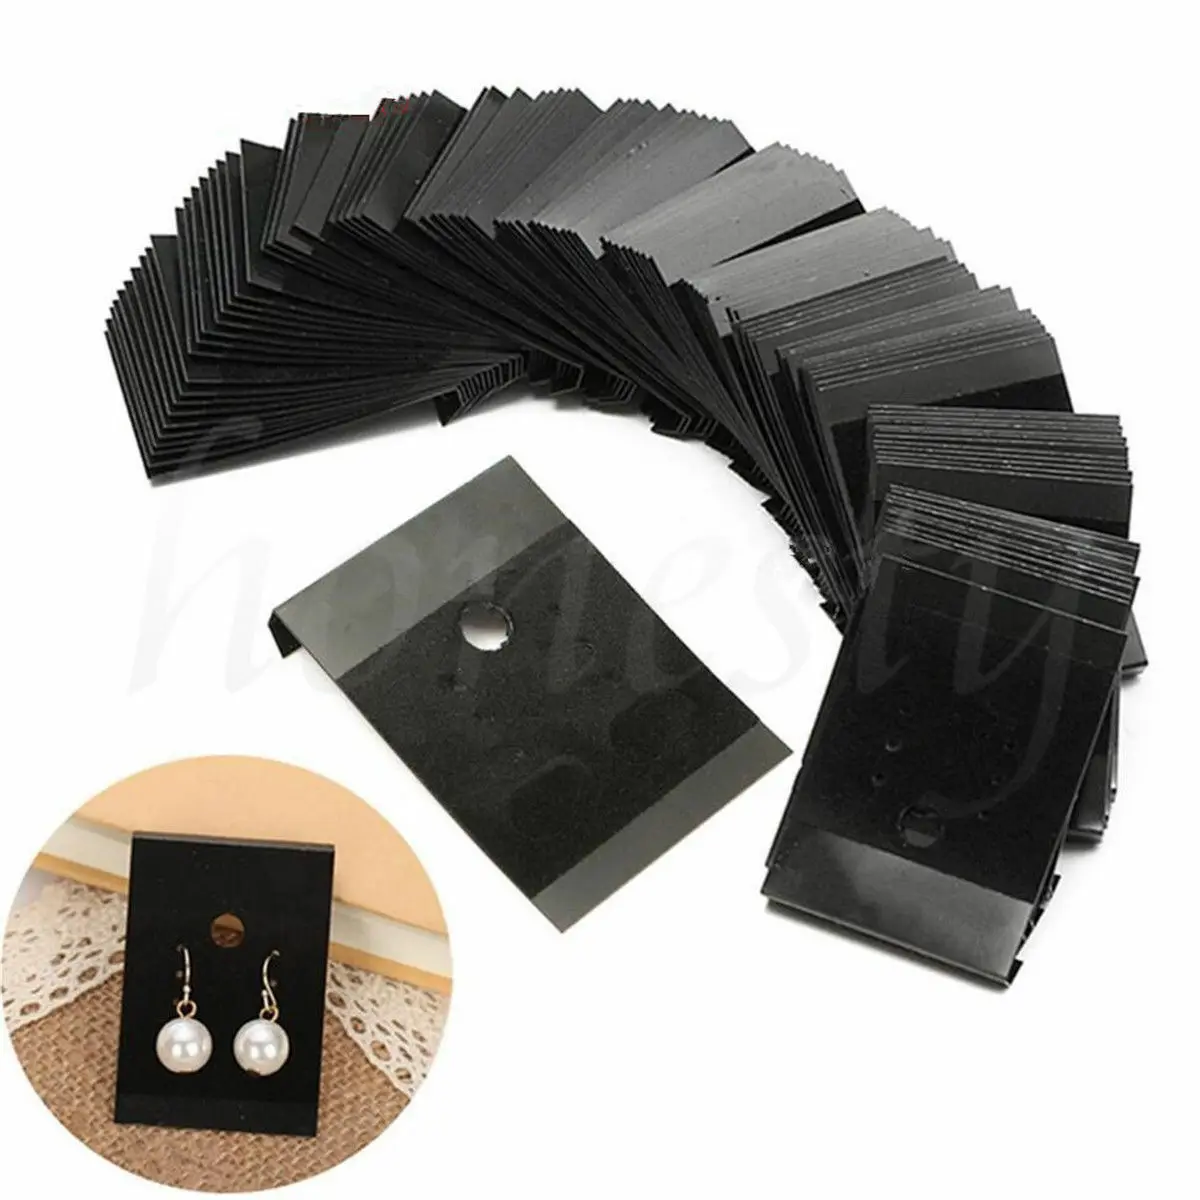 Professional Plastic Earring Studs Holder Display Hang Cards Black 100pc 